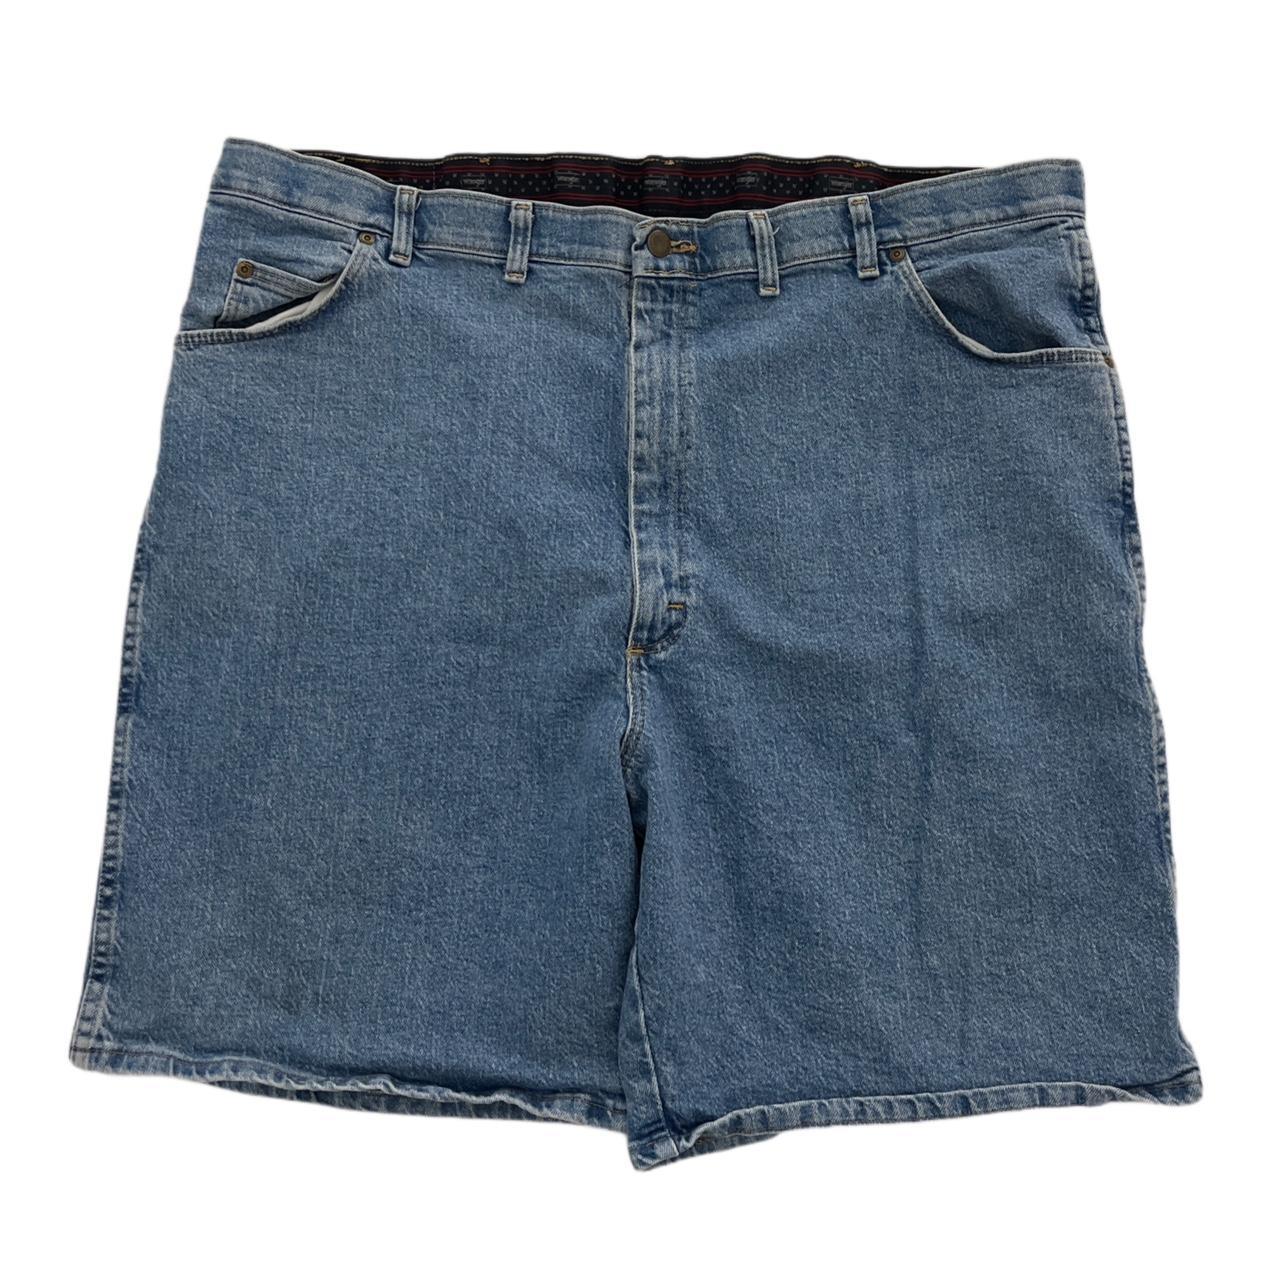 Wrangler Jorts jorts!! / in good condition with... - Depop